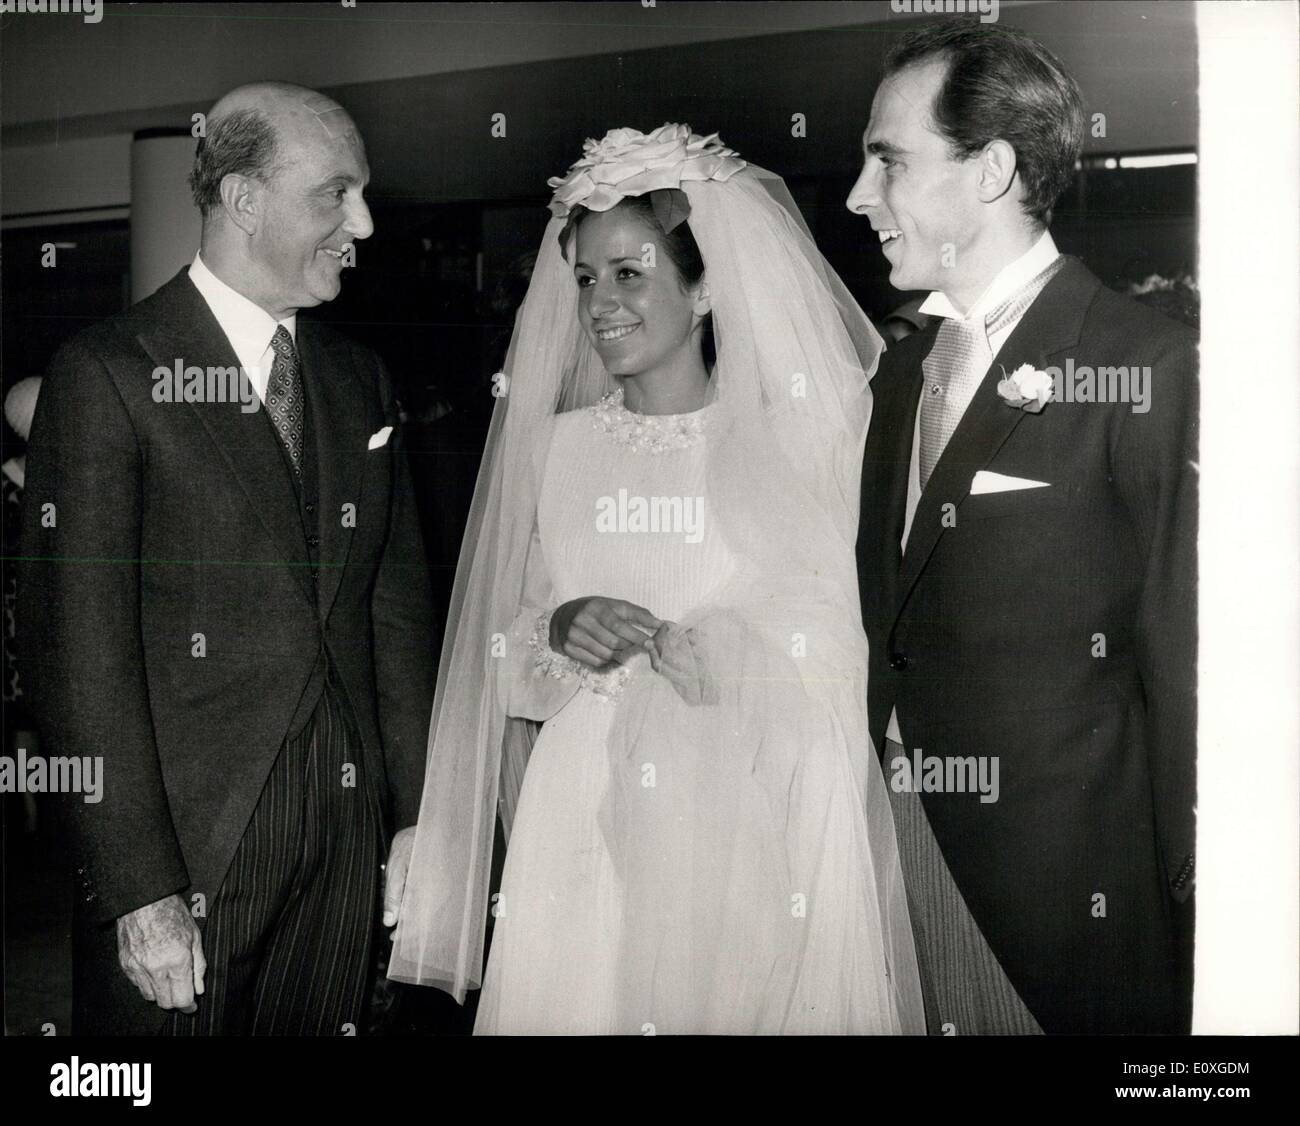 Sep. 26, 1966 - Wedding Reception at Royal Festival Hall - Olga Forte, Daughter of Mr. and Mrs. Charles Forte, was Married today at St. Mary's Hampstead, to Alessandro, eldest son of General and Marchesa Polizzi di Sorrentino, of Rome. Seven Hundred guests attended the reception whih was held at the Royal Festival Hall. keystone Photo Shows:- Ex-King Umberto of italy, Left, Chats to the Bride and Groom at the Reception today. Stock Photo